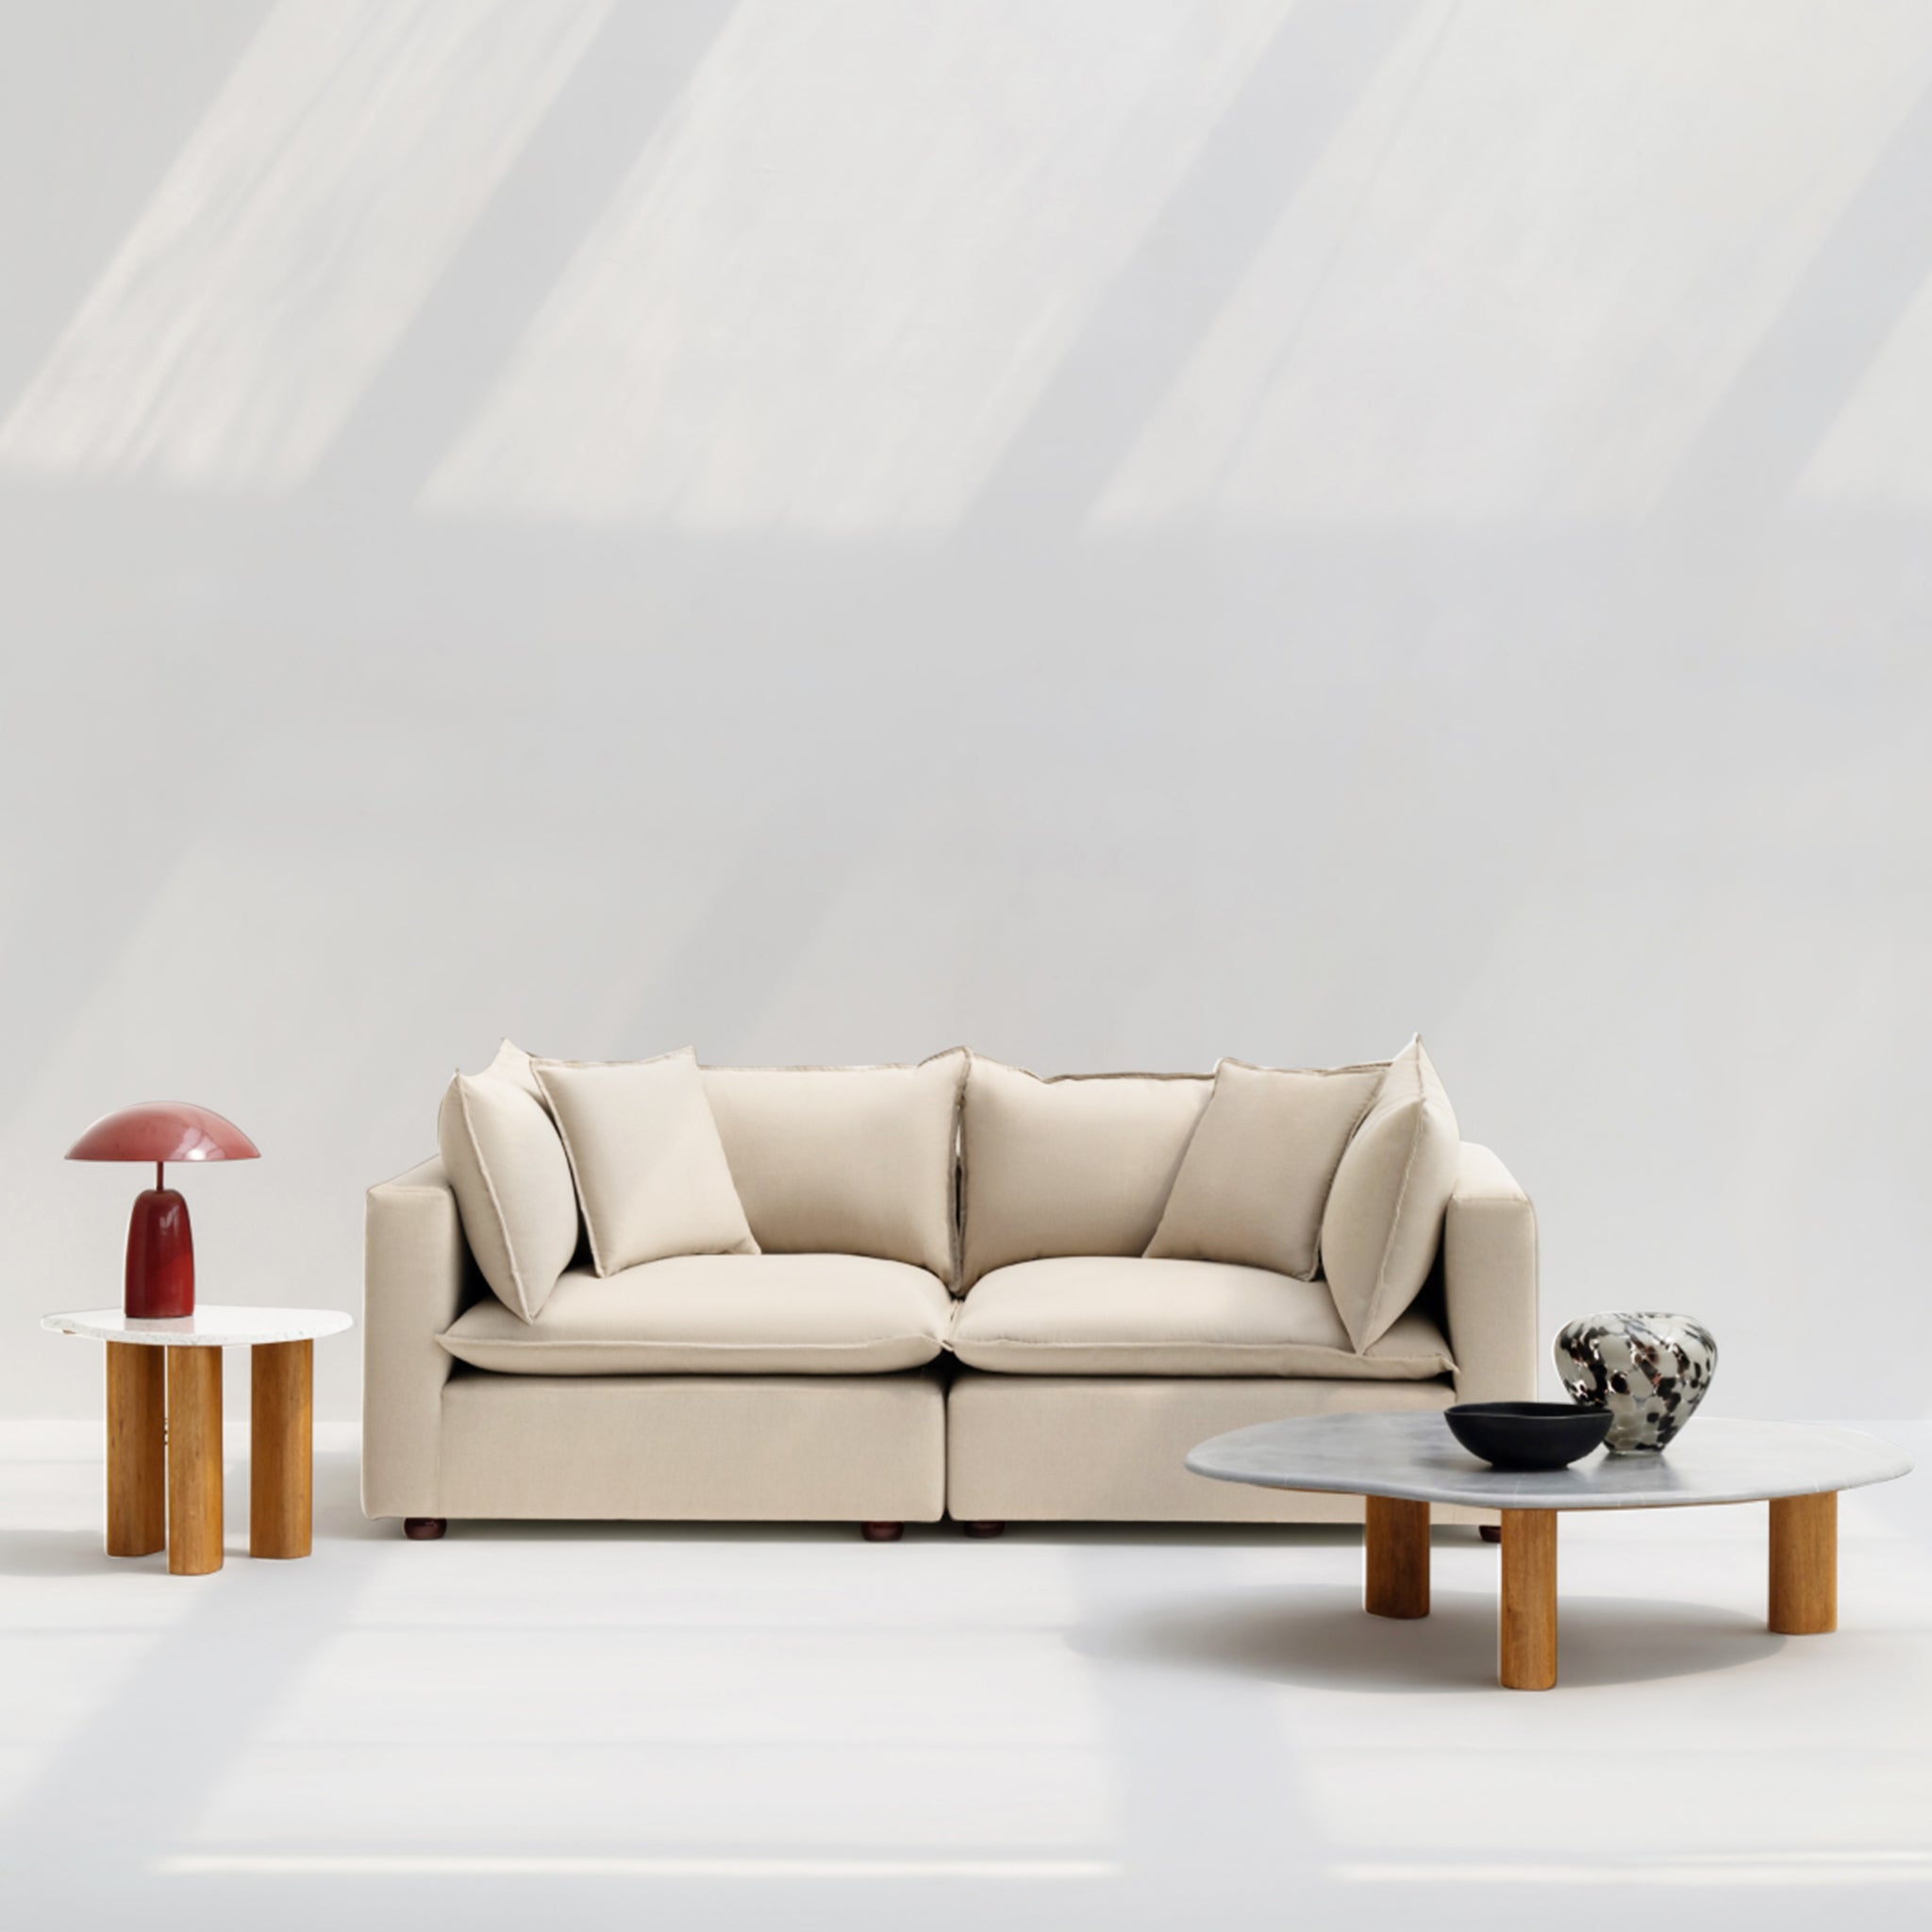 Beige loveseat sofa with soft cushions, styled with modern coffee tables and decorative elements in a bright, minimalist living room.